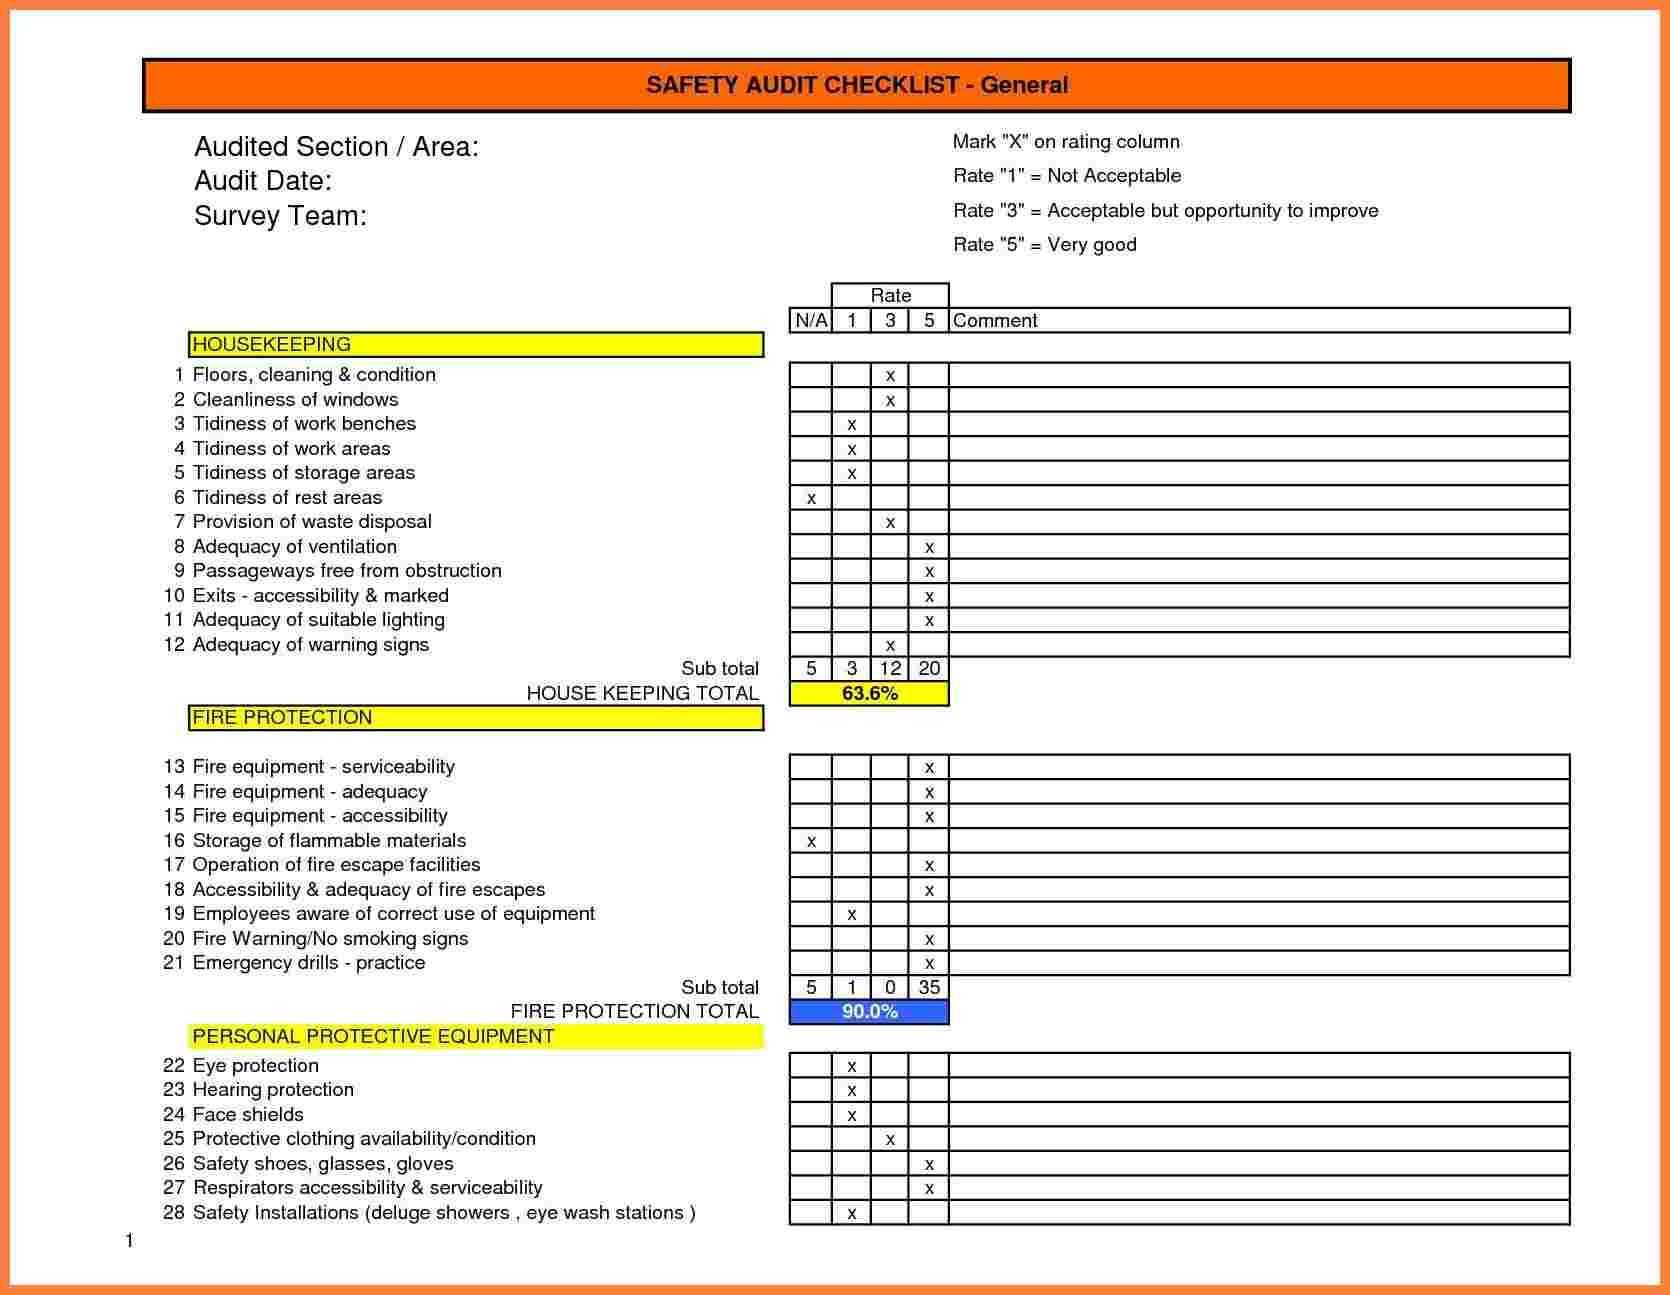 Image Result For Warehouse Health And Safety Audit Form Inside Data Center Audit Report Template